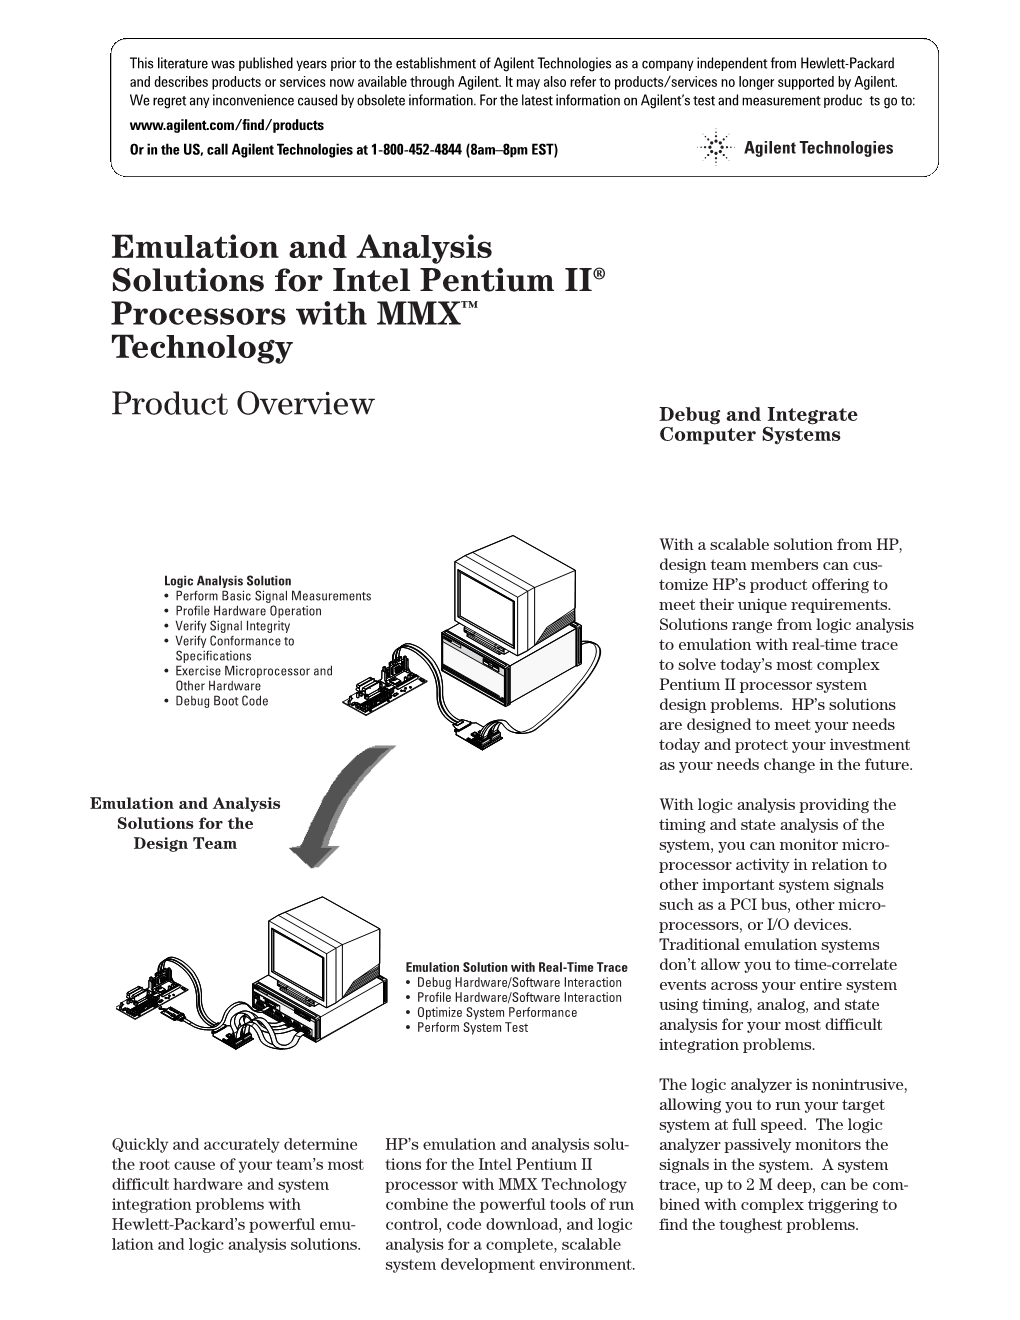 Emulation and Analysis Solutions for Intel Pentium II® Processors with MMX™ Technology